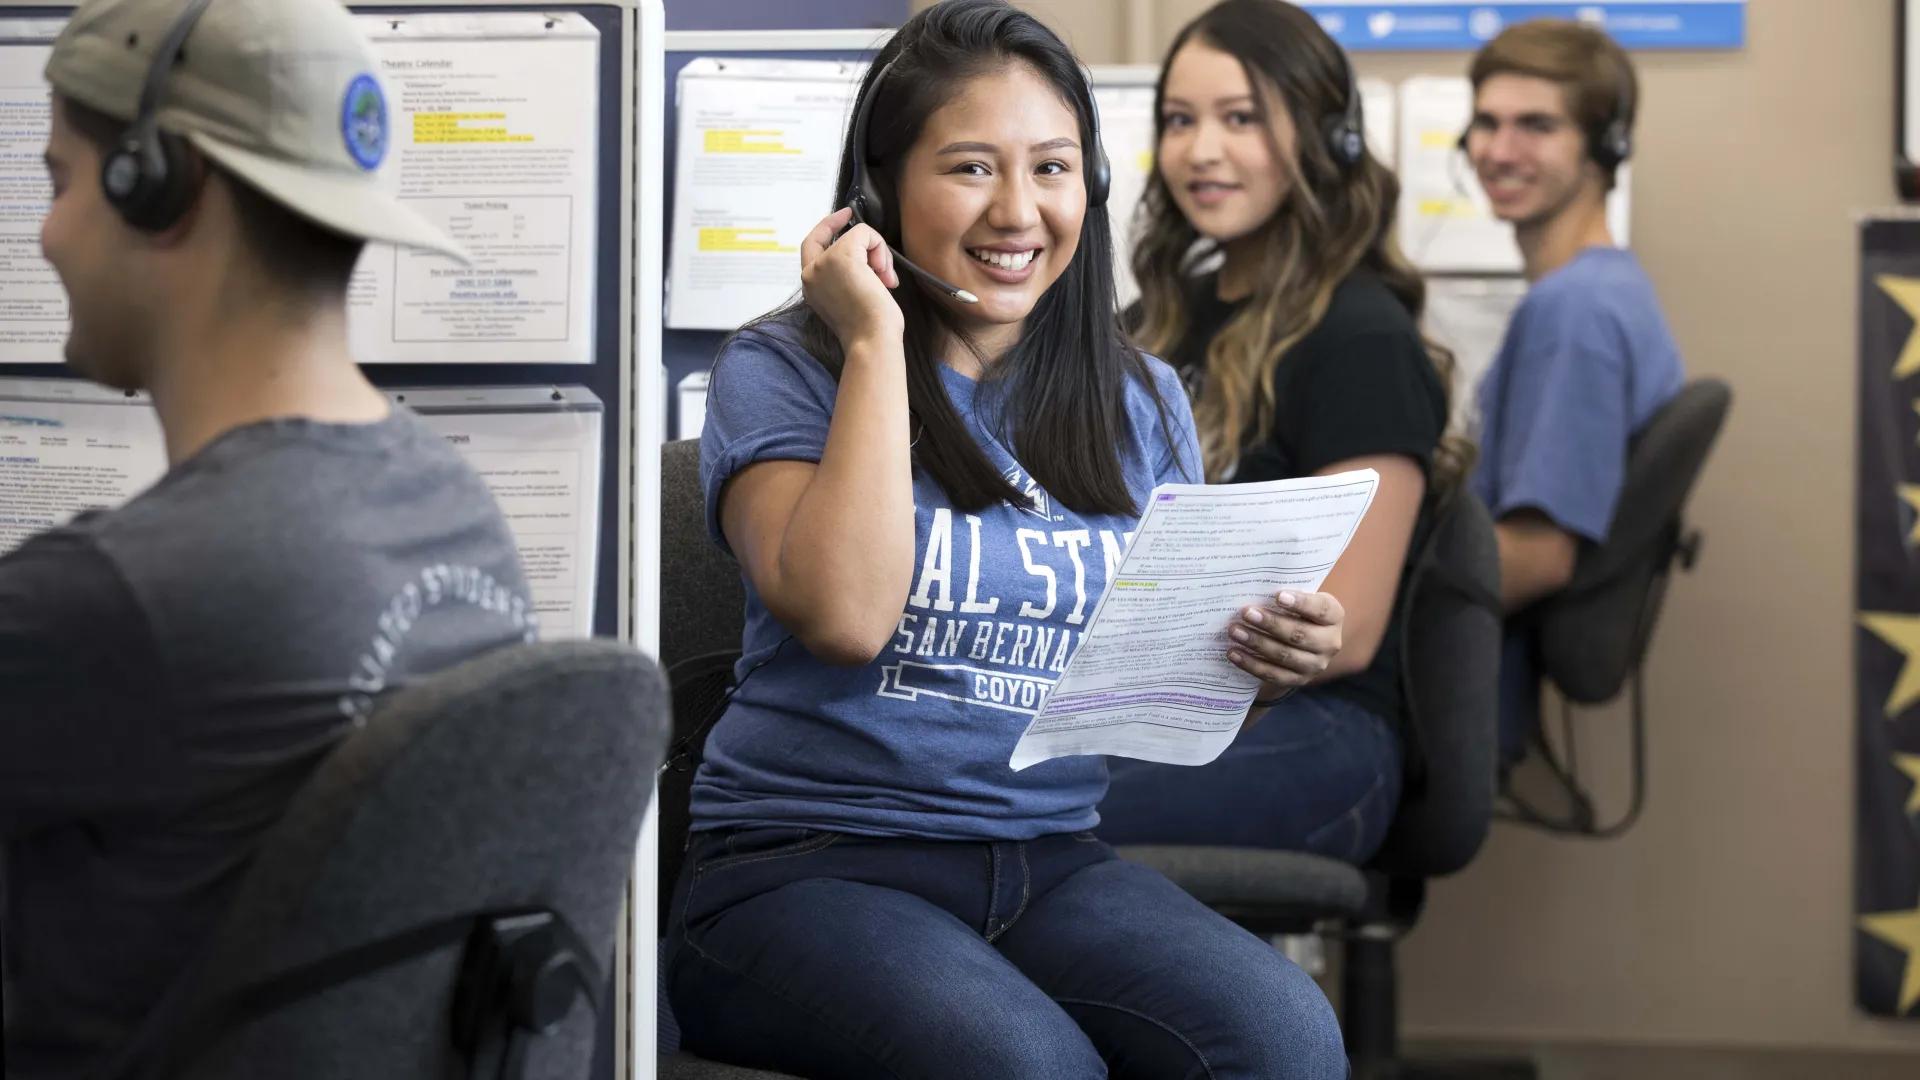 CSUSB’s Giving Tuesday campaign is now underway through Tuesday, Dec. 1.